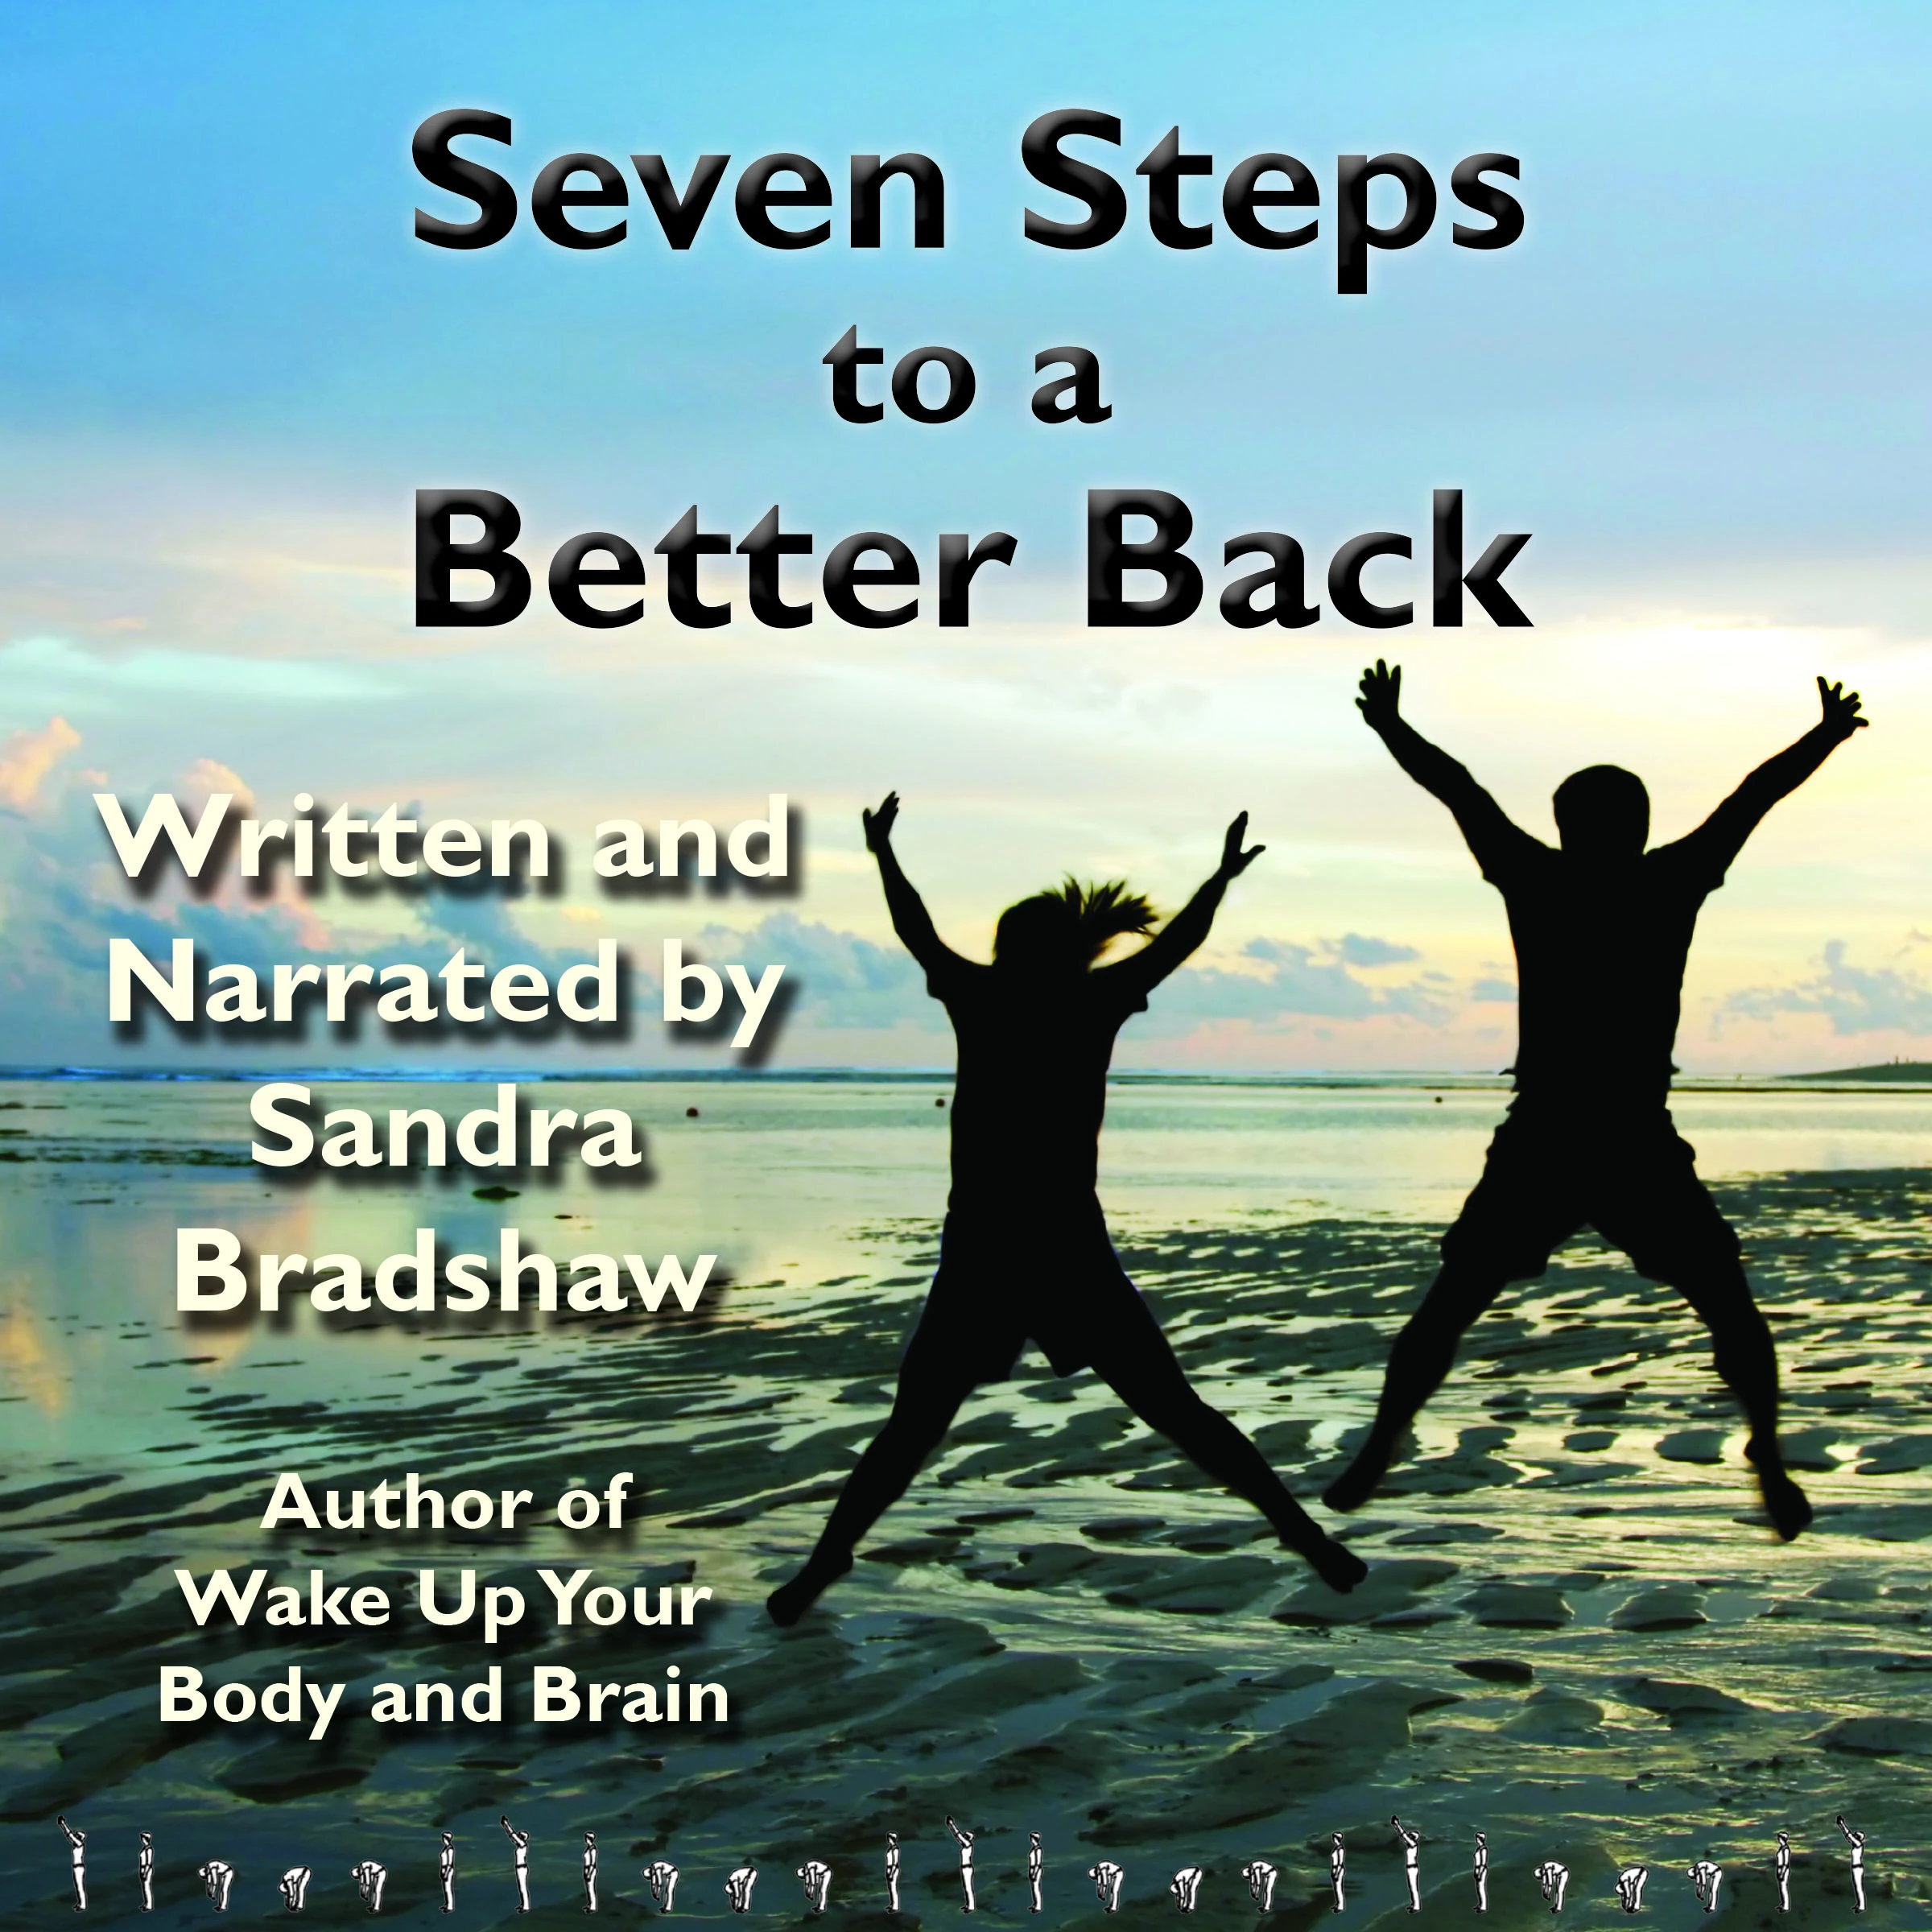 Seven Steps to a Better Back Audiobook by Sandra Bradshaw